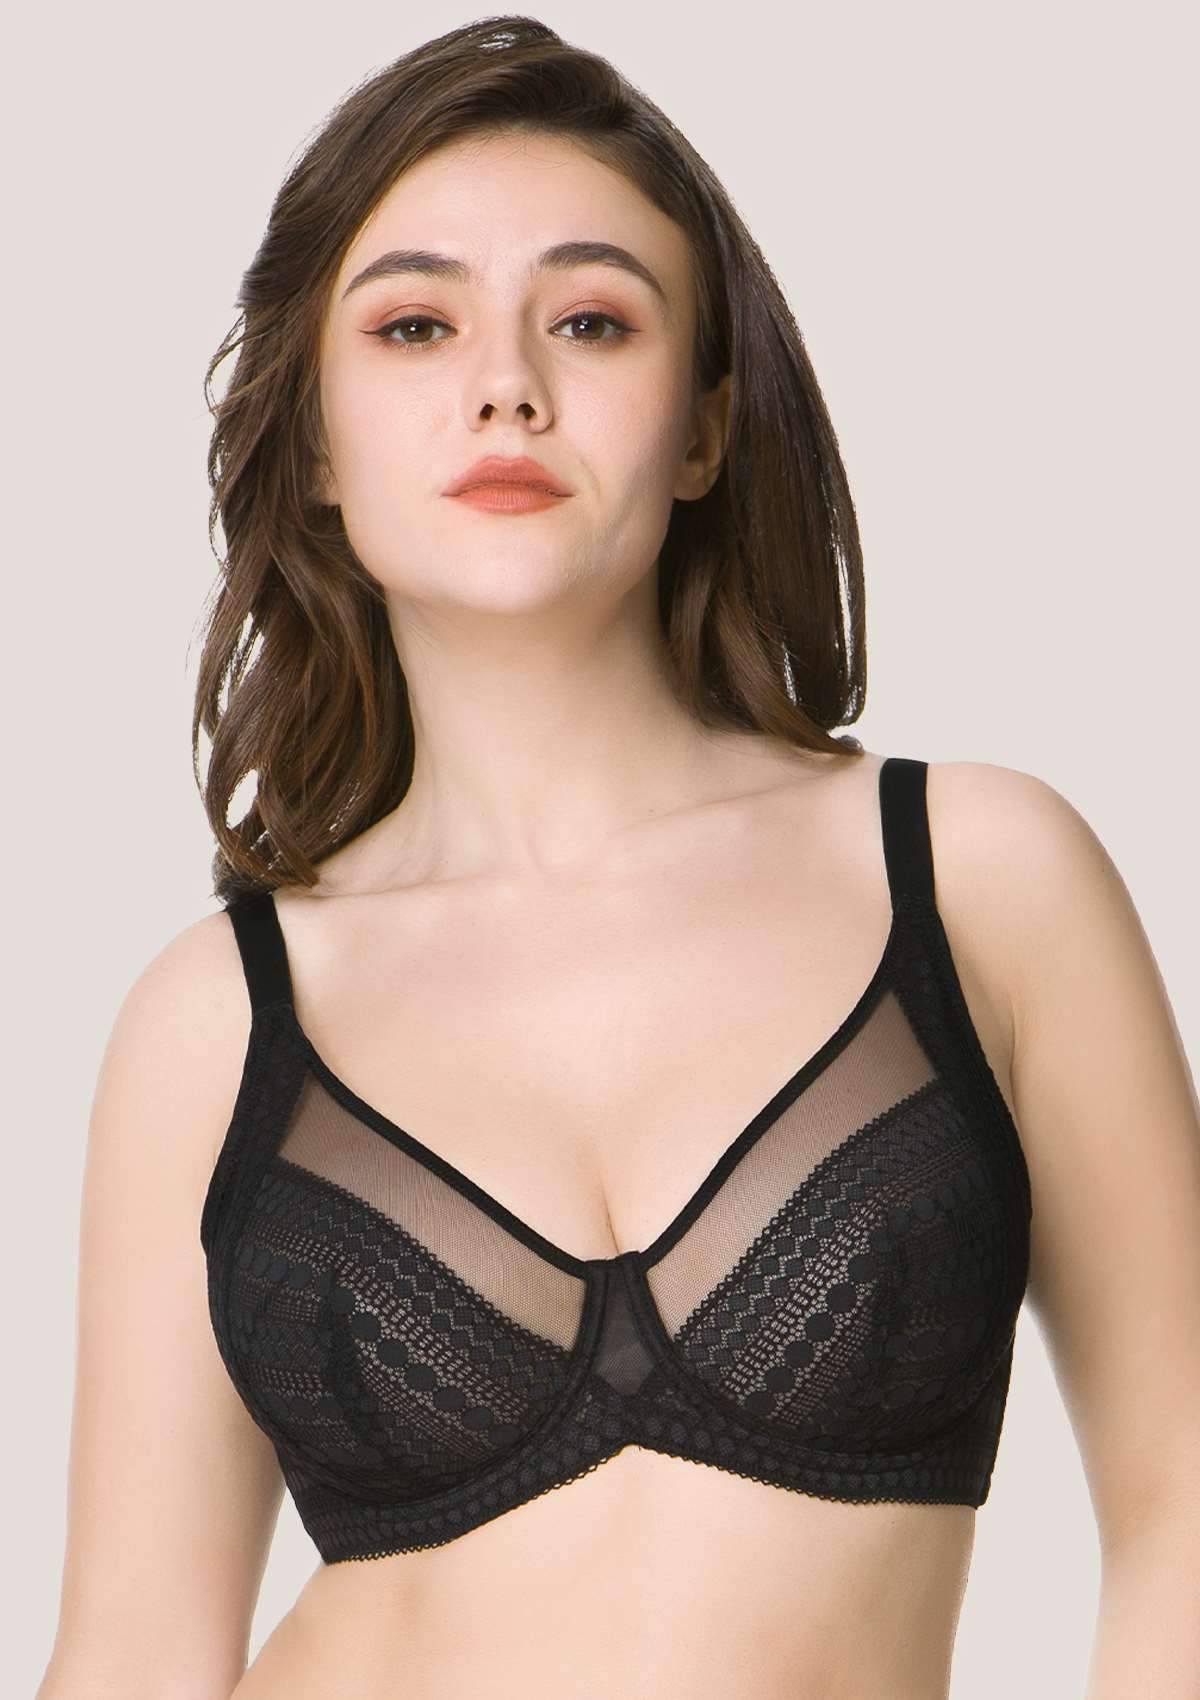 HSIA Heroine Matching Bra And Panties: Unlined Lace Unpadded Bra - Black / 40 / D